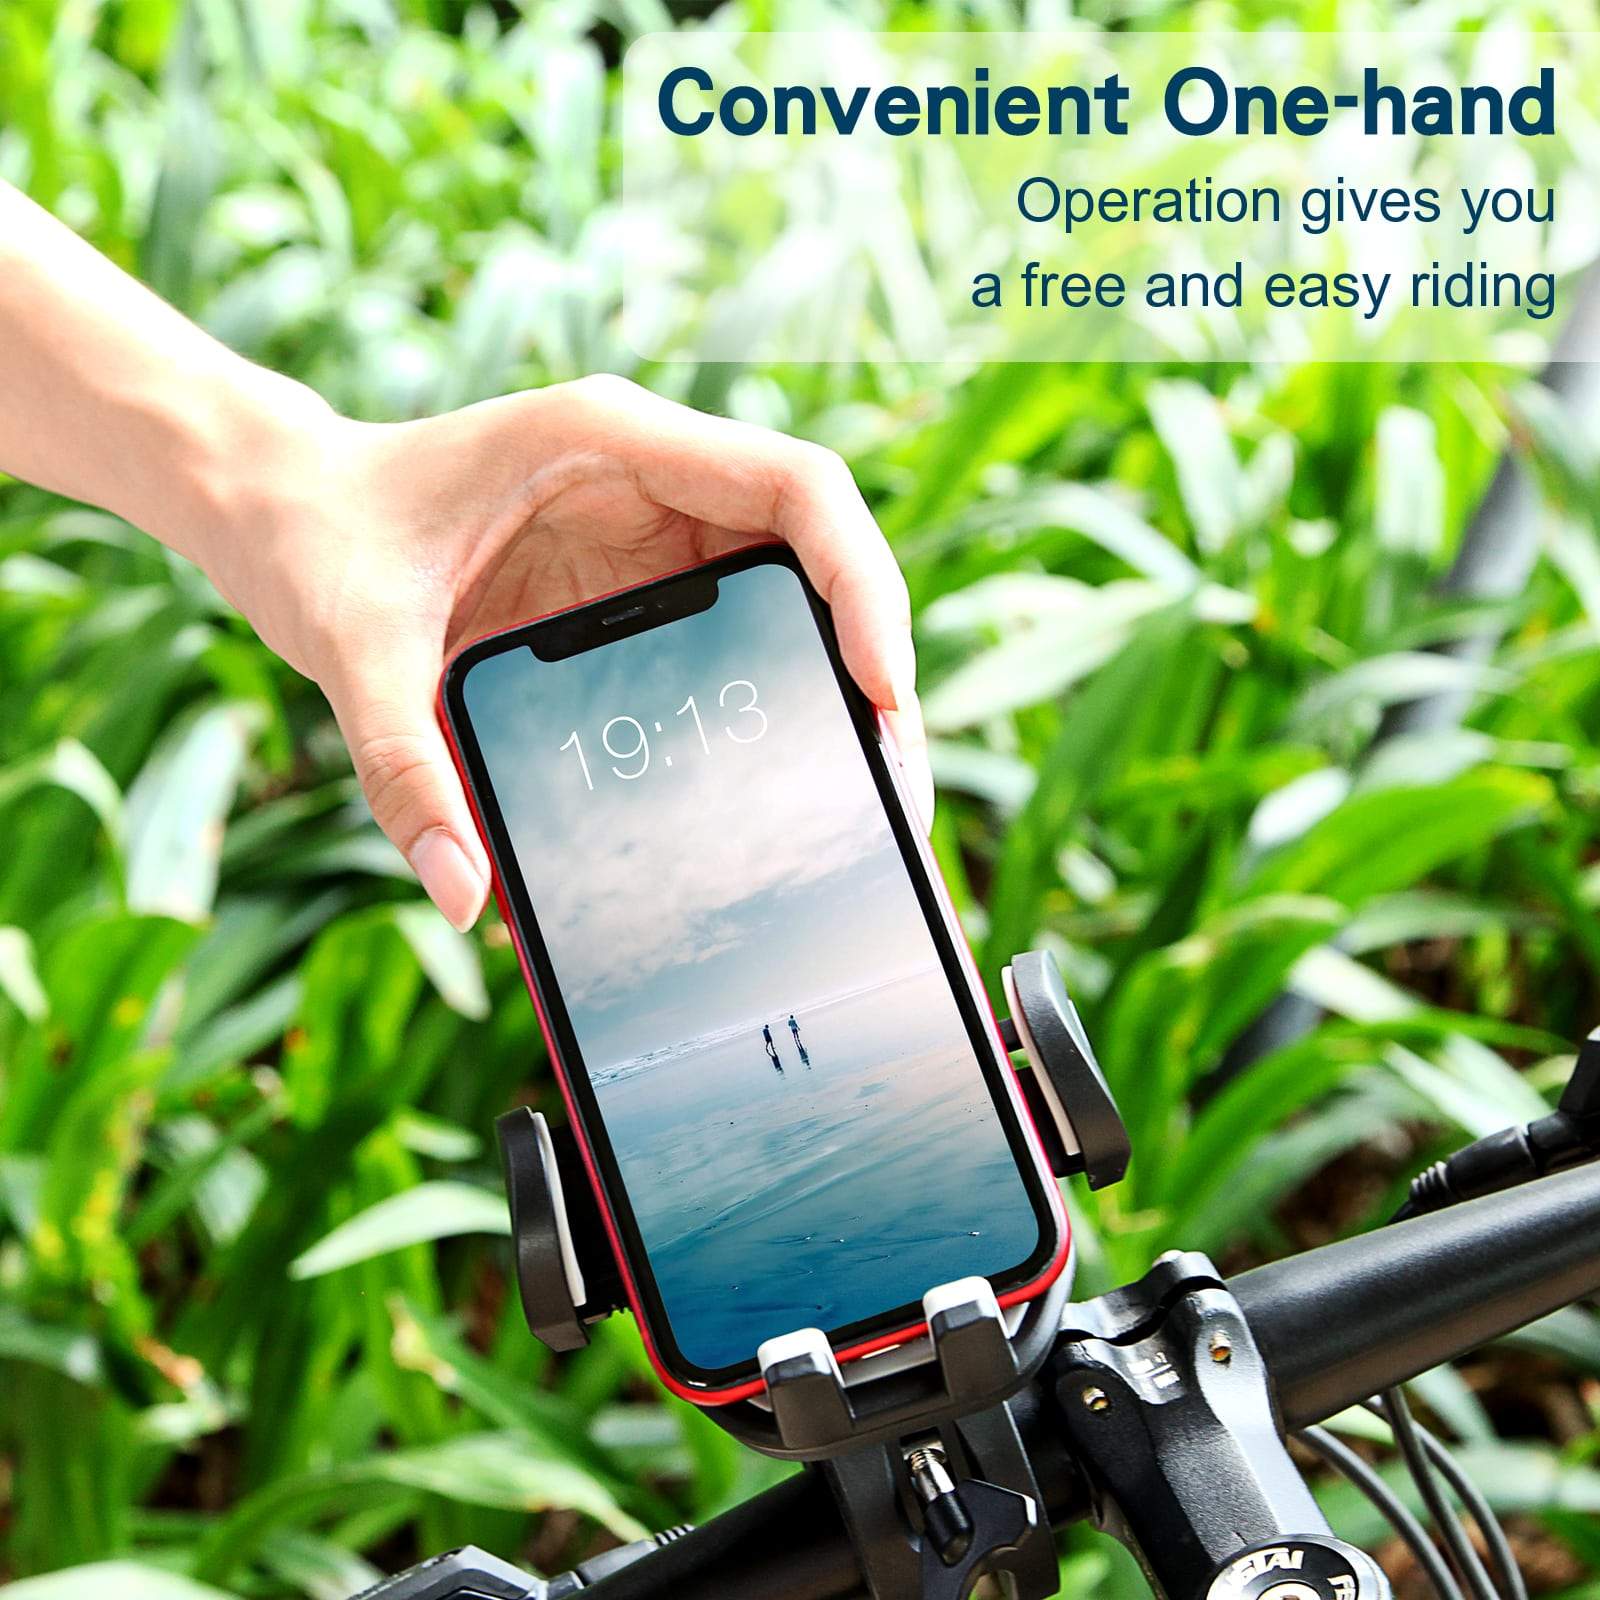 convenient bike phone holder allowing one-hand operation